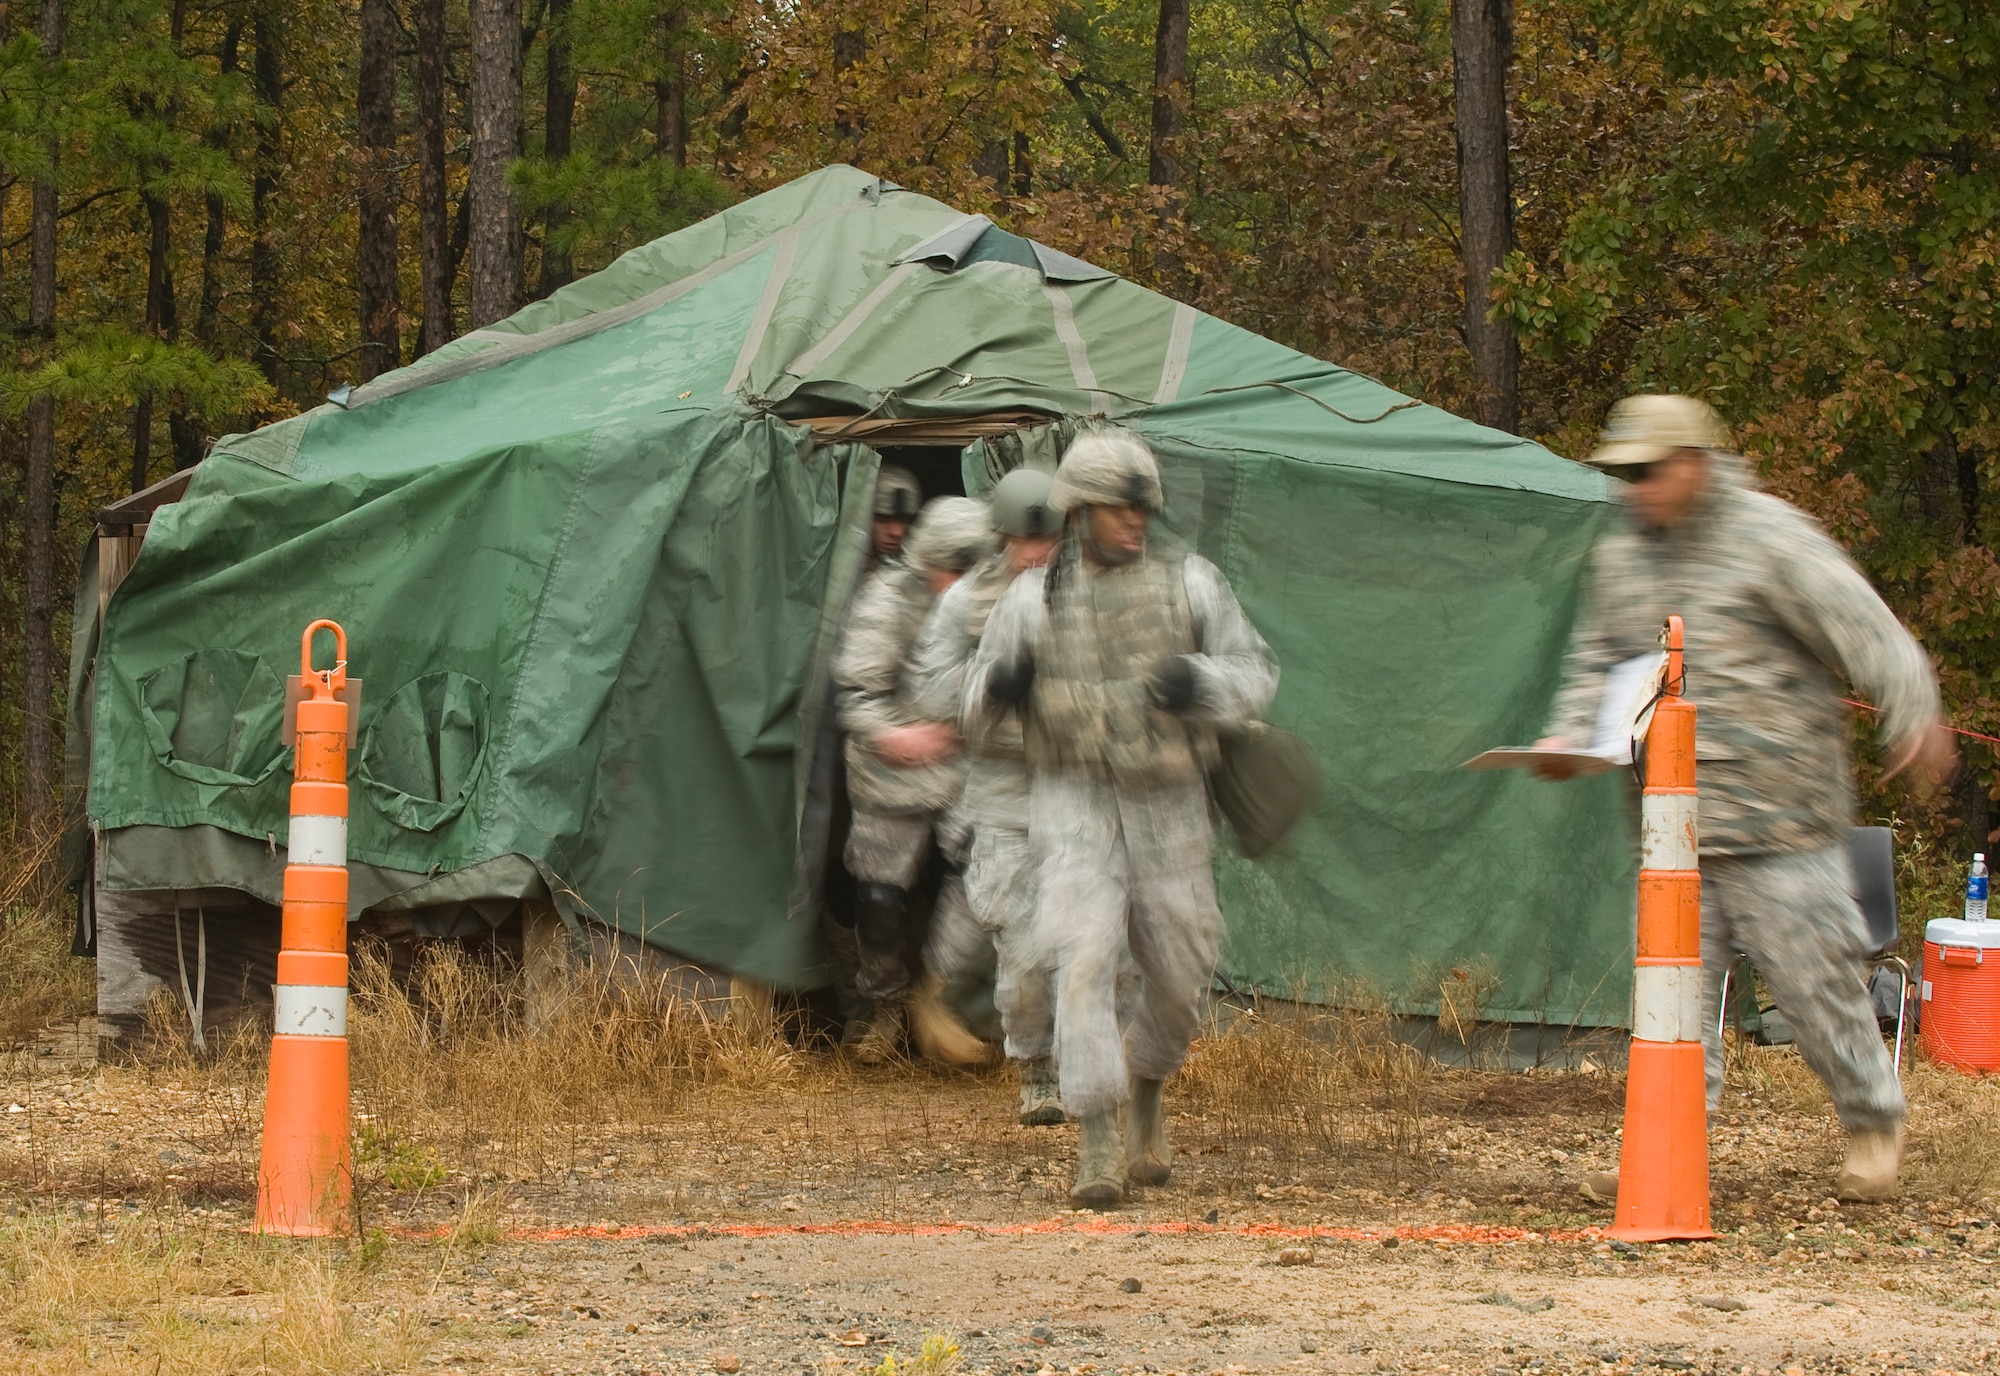 Security Forces Airmen competing in the Global Strike Challenge exit a tent during the mental and physical challenge scenario portion of the competition. The MAP challenge is a strenuous course consisting of multiple scenarios and obstacles that each security forces team must complete. Security Forces Airmen from Air Force Global Strike Command, Air Combat Command, and Air Reserve components came together at Barksdale Air Force Base, La., to compete. (U.S. Air Force photo by Senior Airman Chad Warren)(RELEASED)